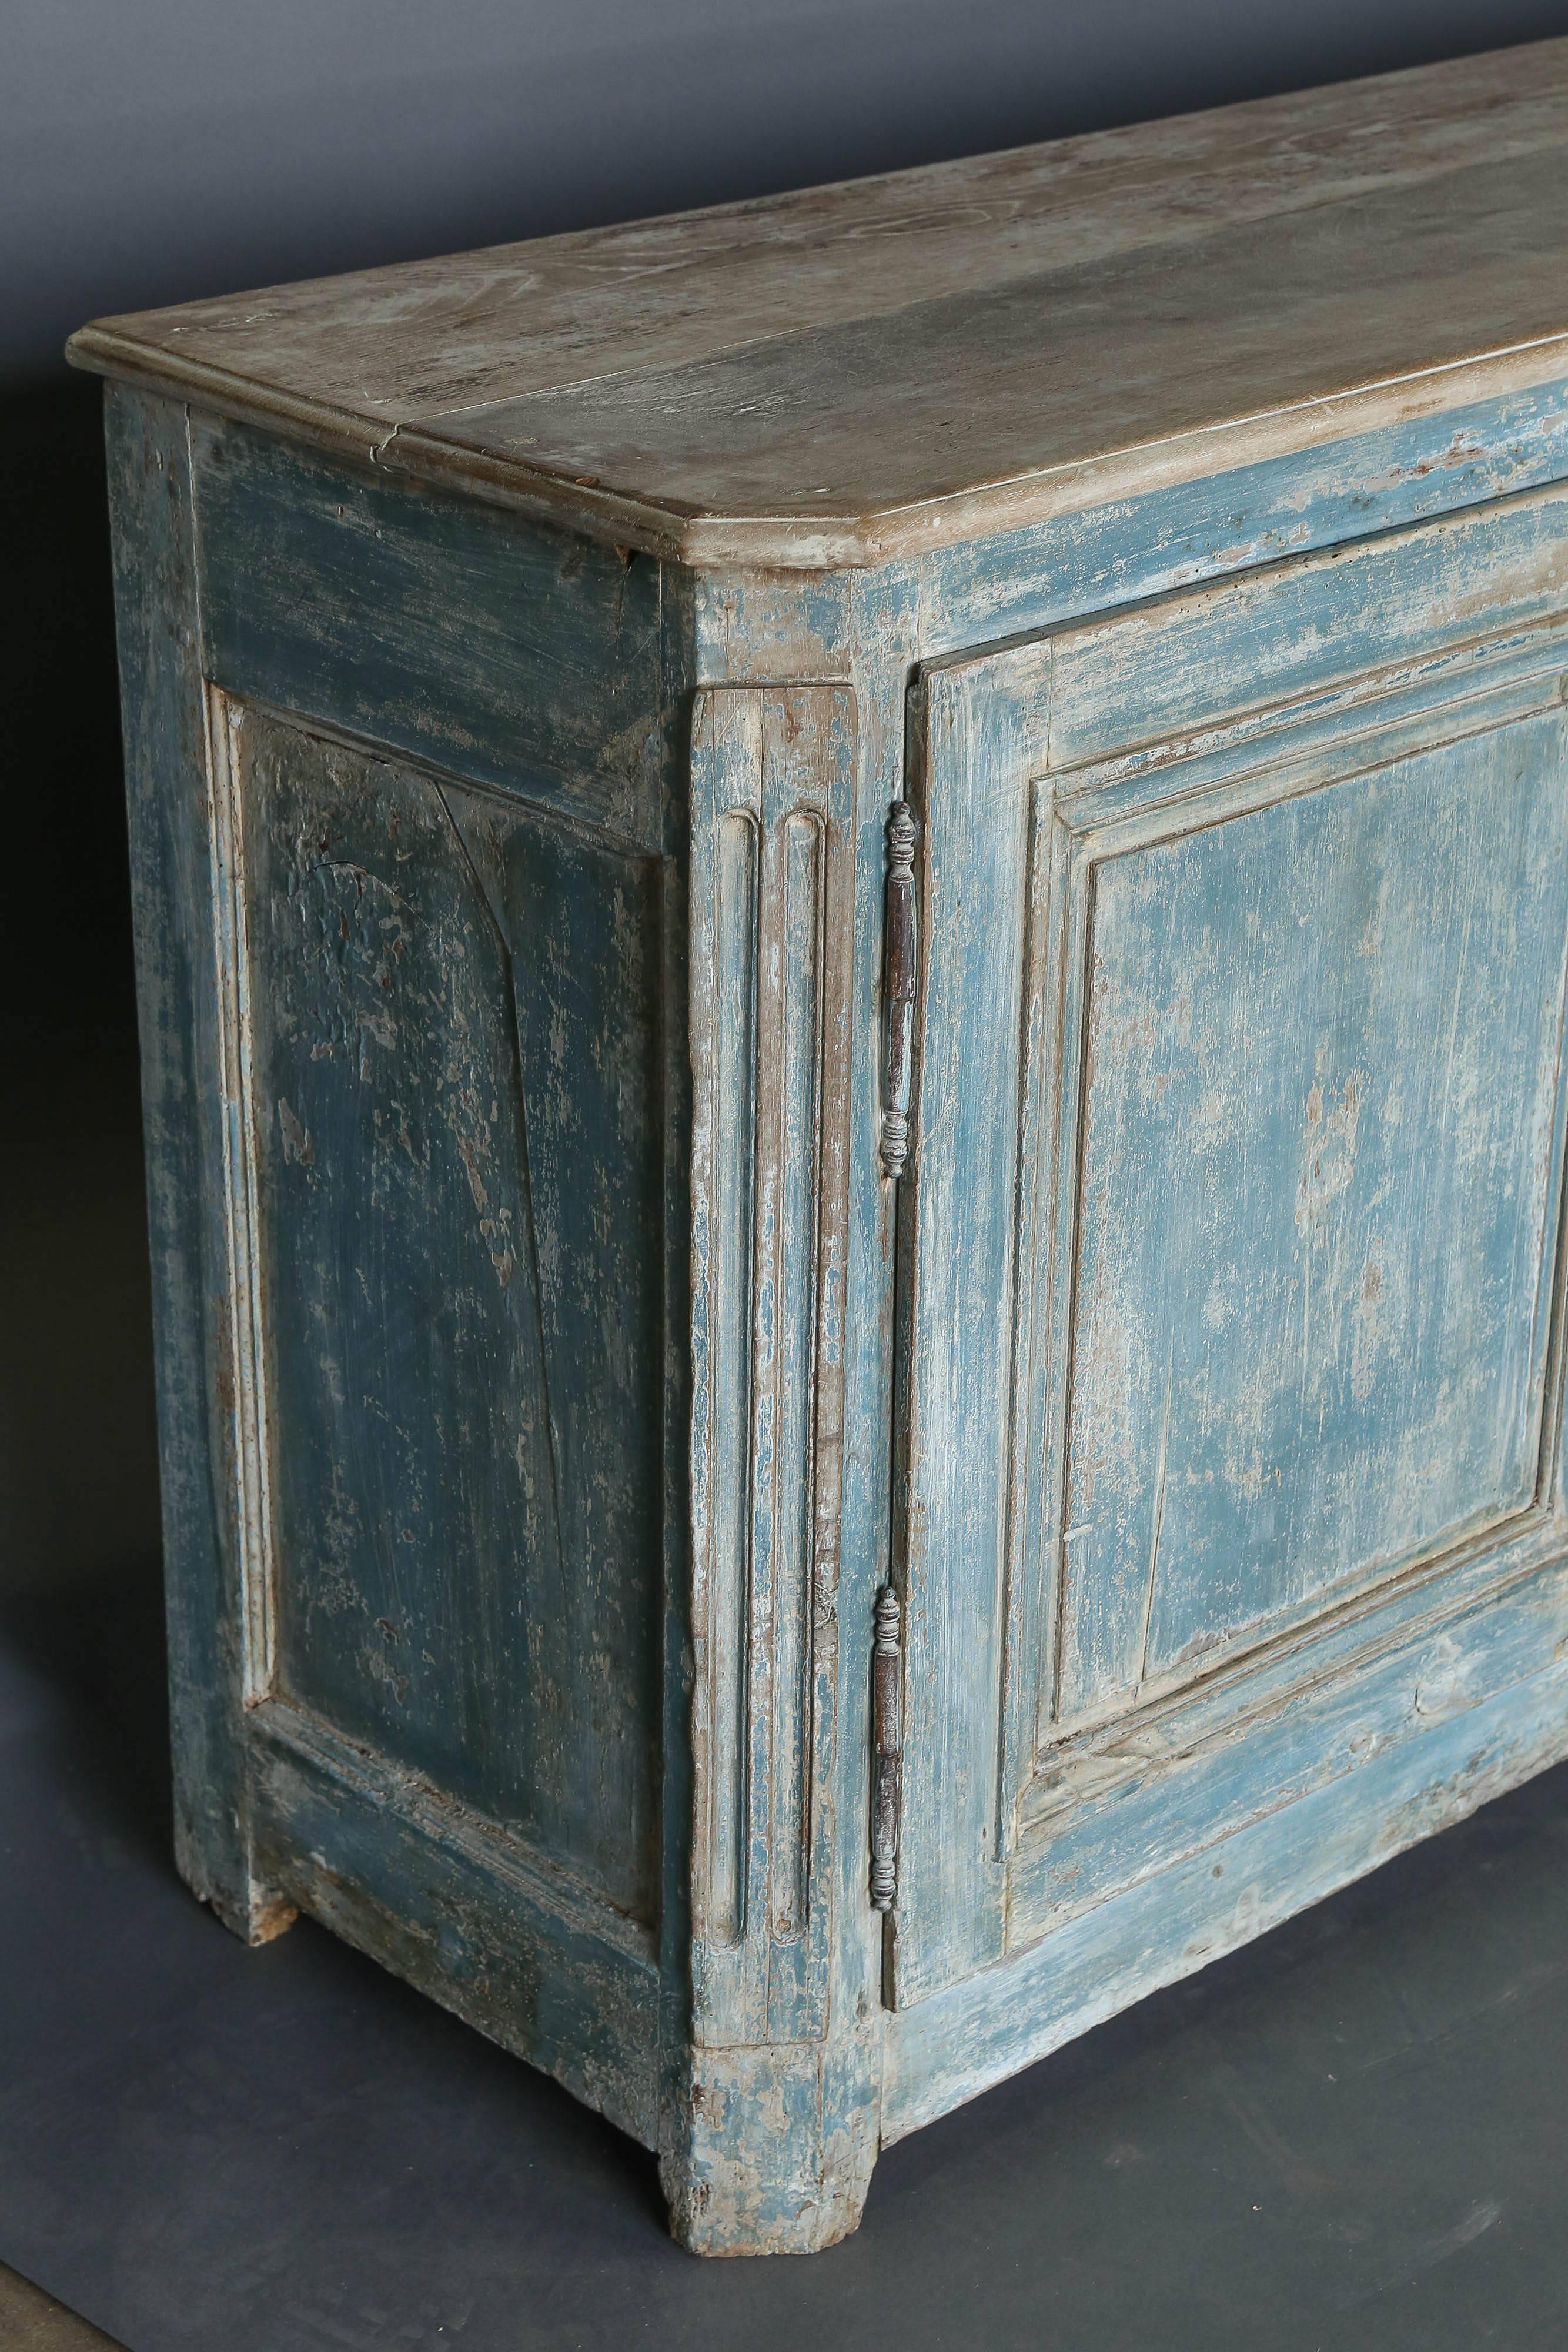 Beautiful 18th century three-door dry scraped paint enfilade or long buffet with Chamfered edges at the corners and grooved line detail. Top of piece has no paint on it and is just the natural wood. There is a small drawer at one end of the piece.